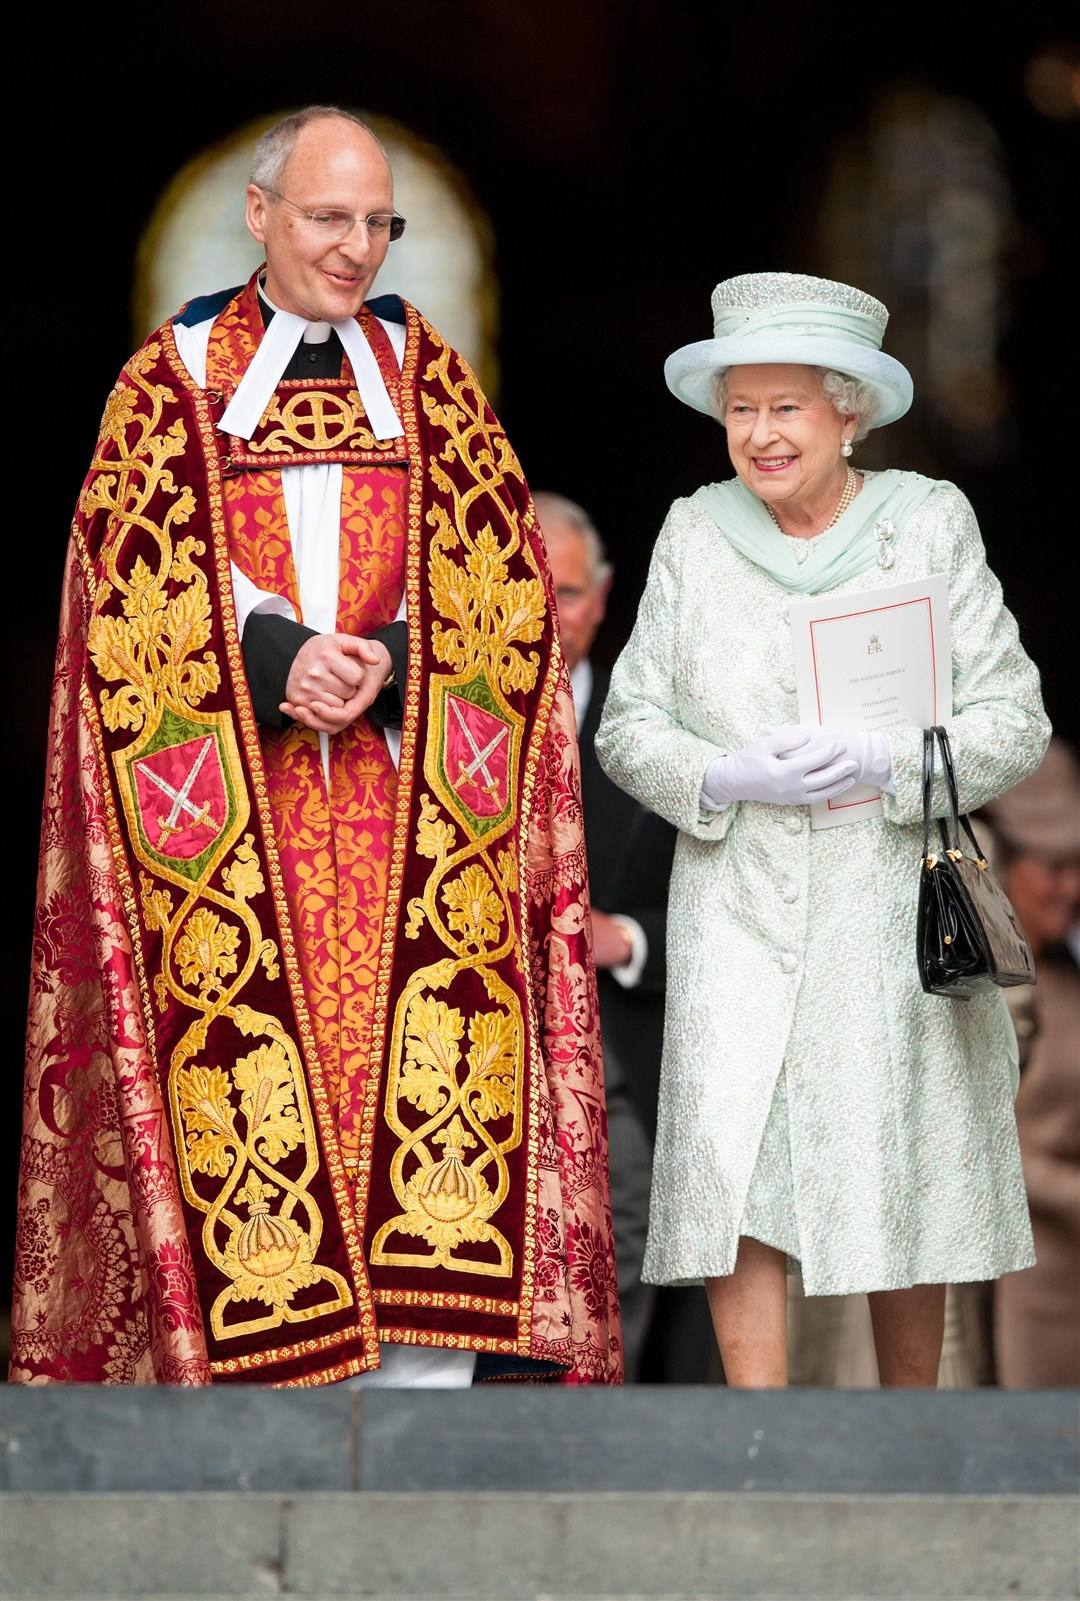 The Dean of St Paul’s, Dr David Ison, pictured with the Queen, will conduct the monarch’s service of thanksgiving (Dominic Lipinski/PA)